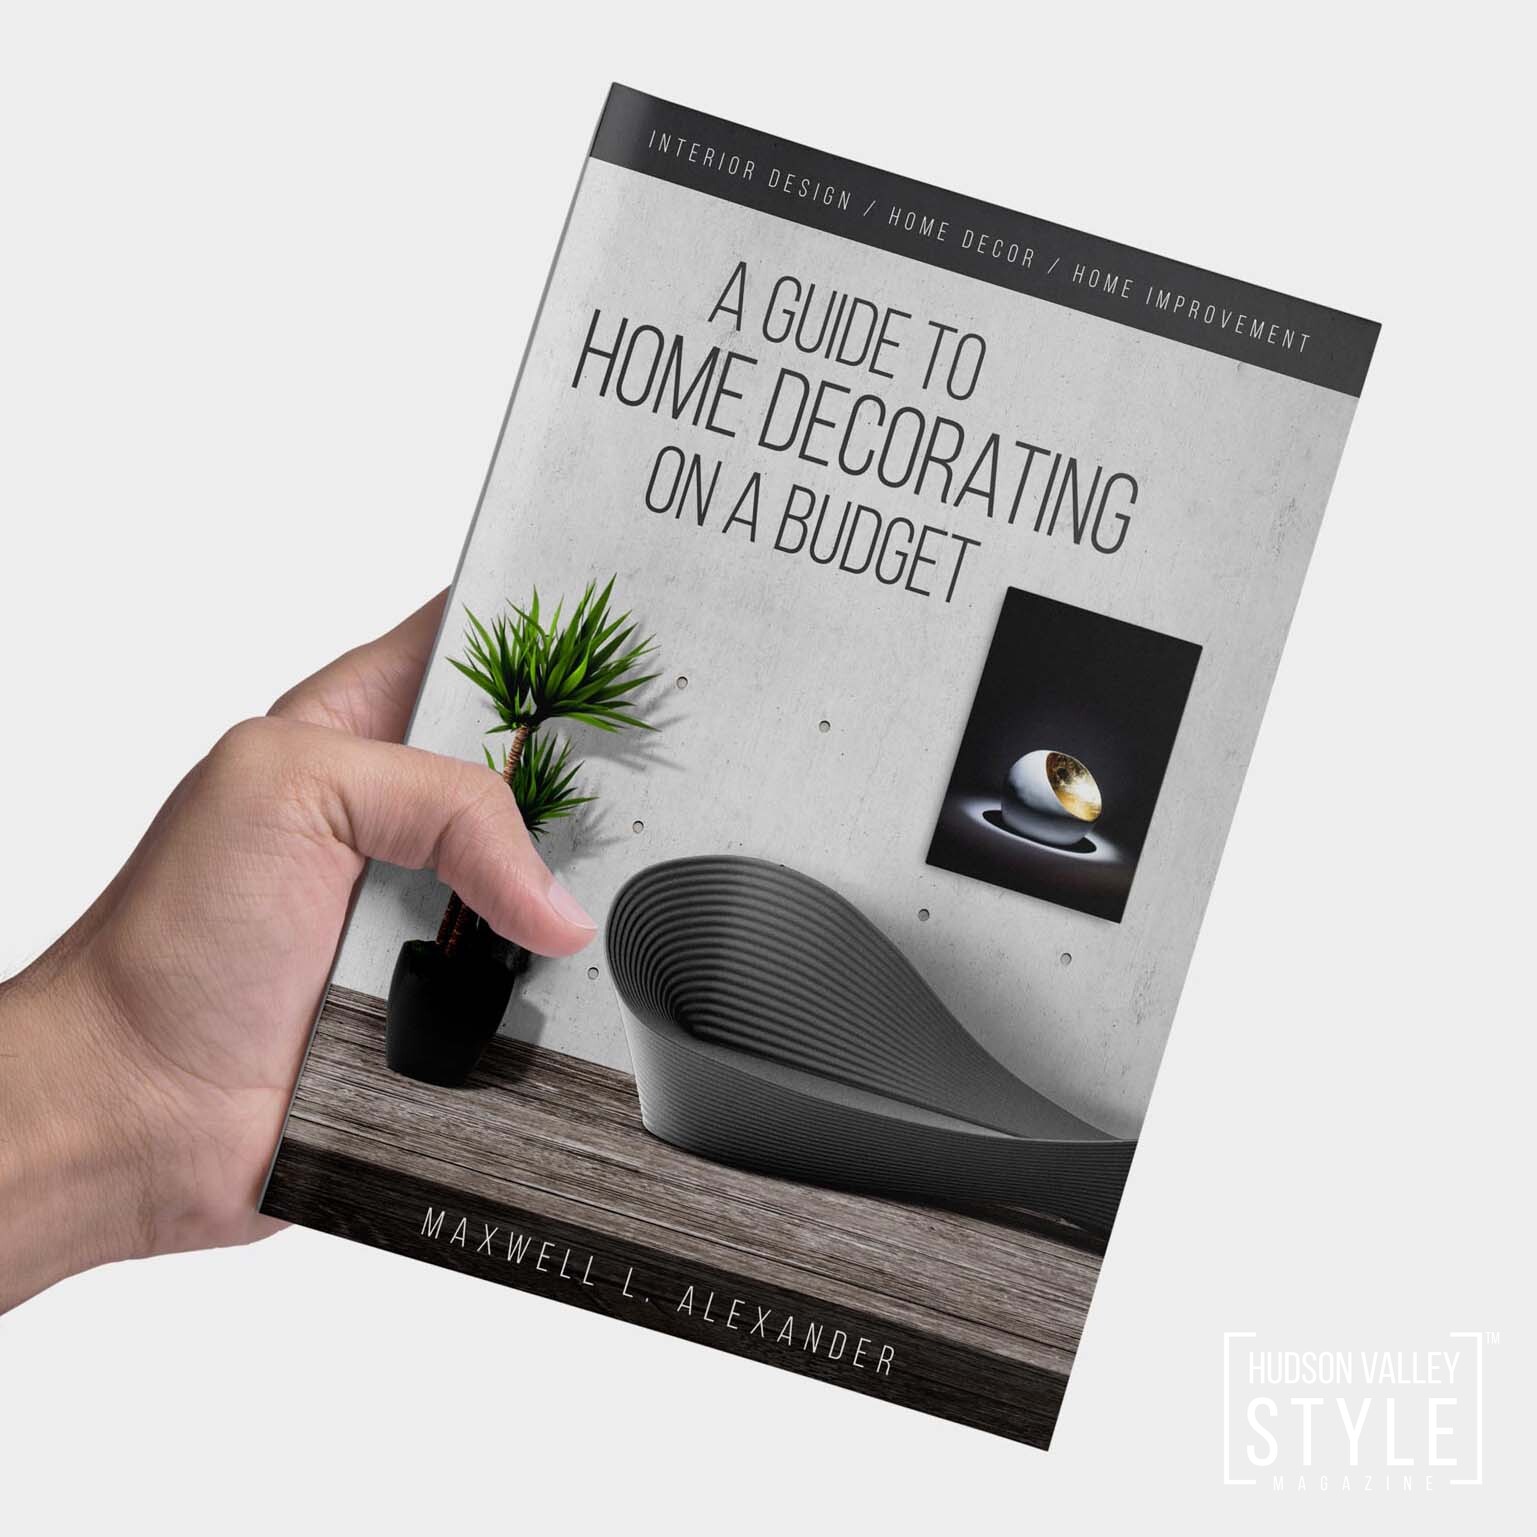 Start New Year with Fresh Home Decor on a Budget! Home Decorating Guide by Maxwell Alexander